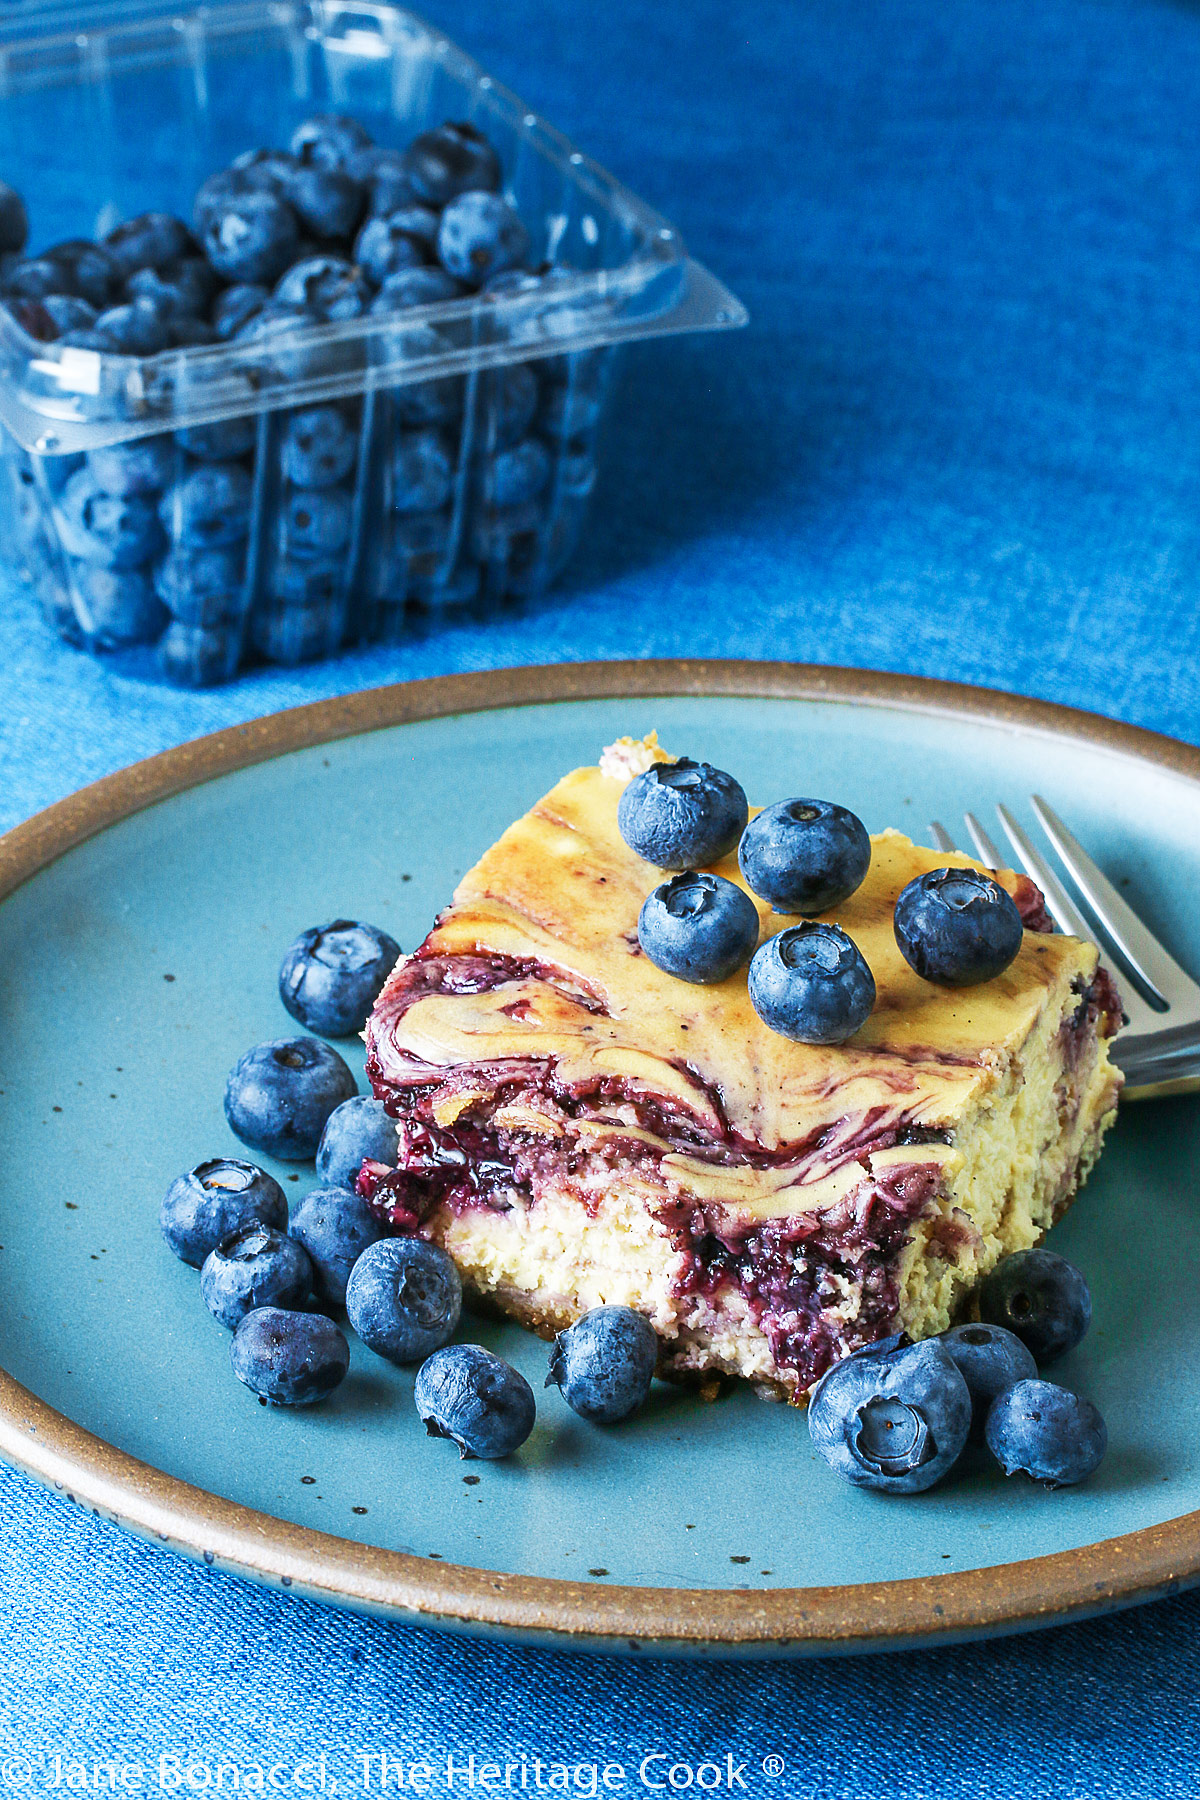 Square of Blueberry Swirl Cheese Cake Bars on turquoise plate on denim blue background surrounded by fresh blueberries © 2023 Jane Bonacci, The Heritage Cook. 